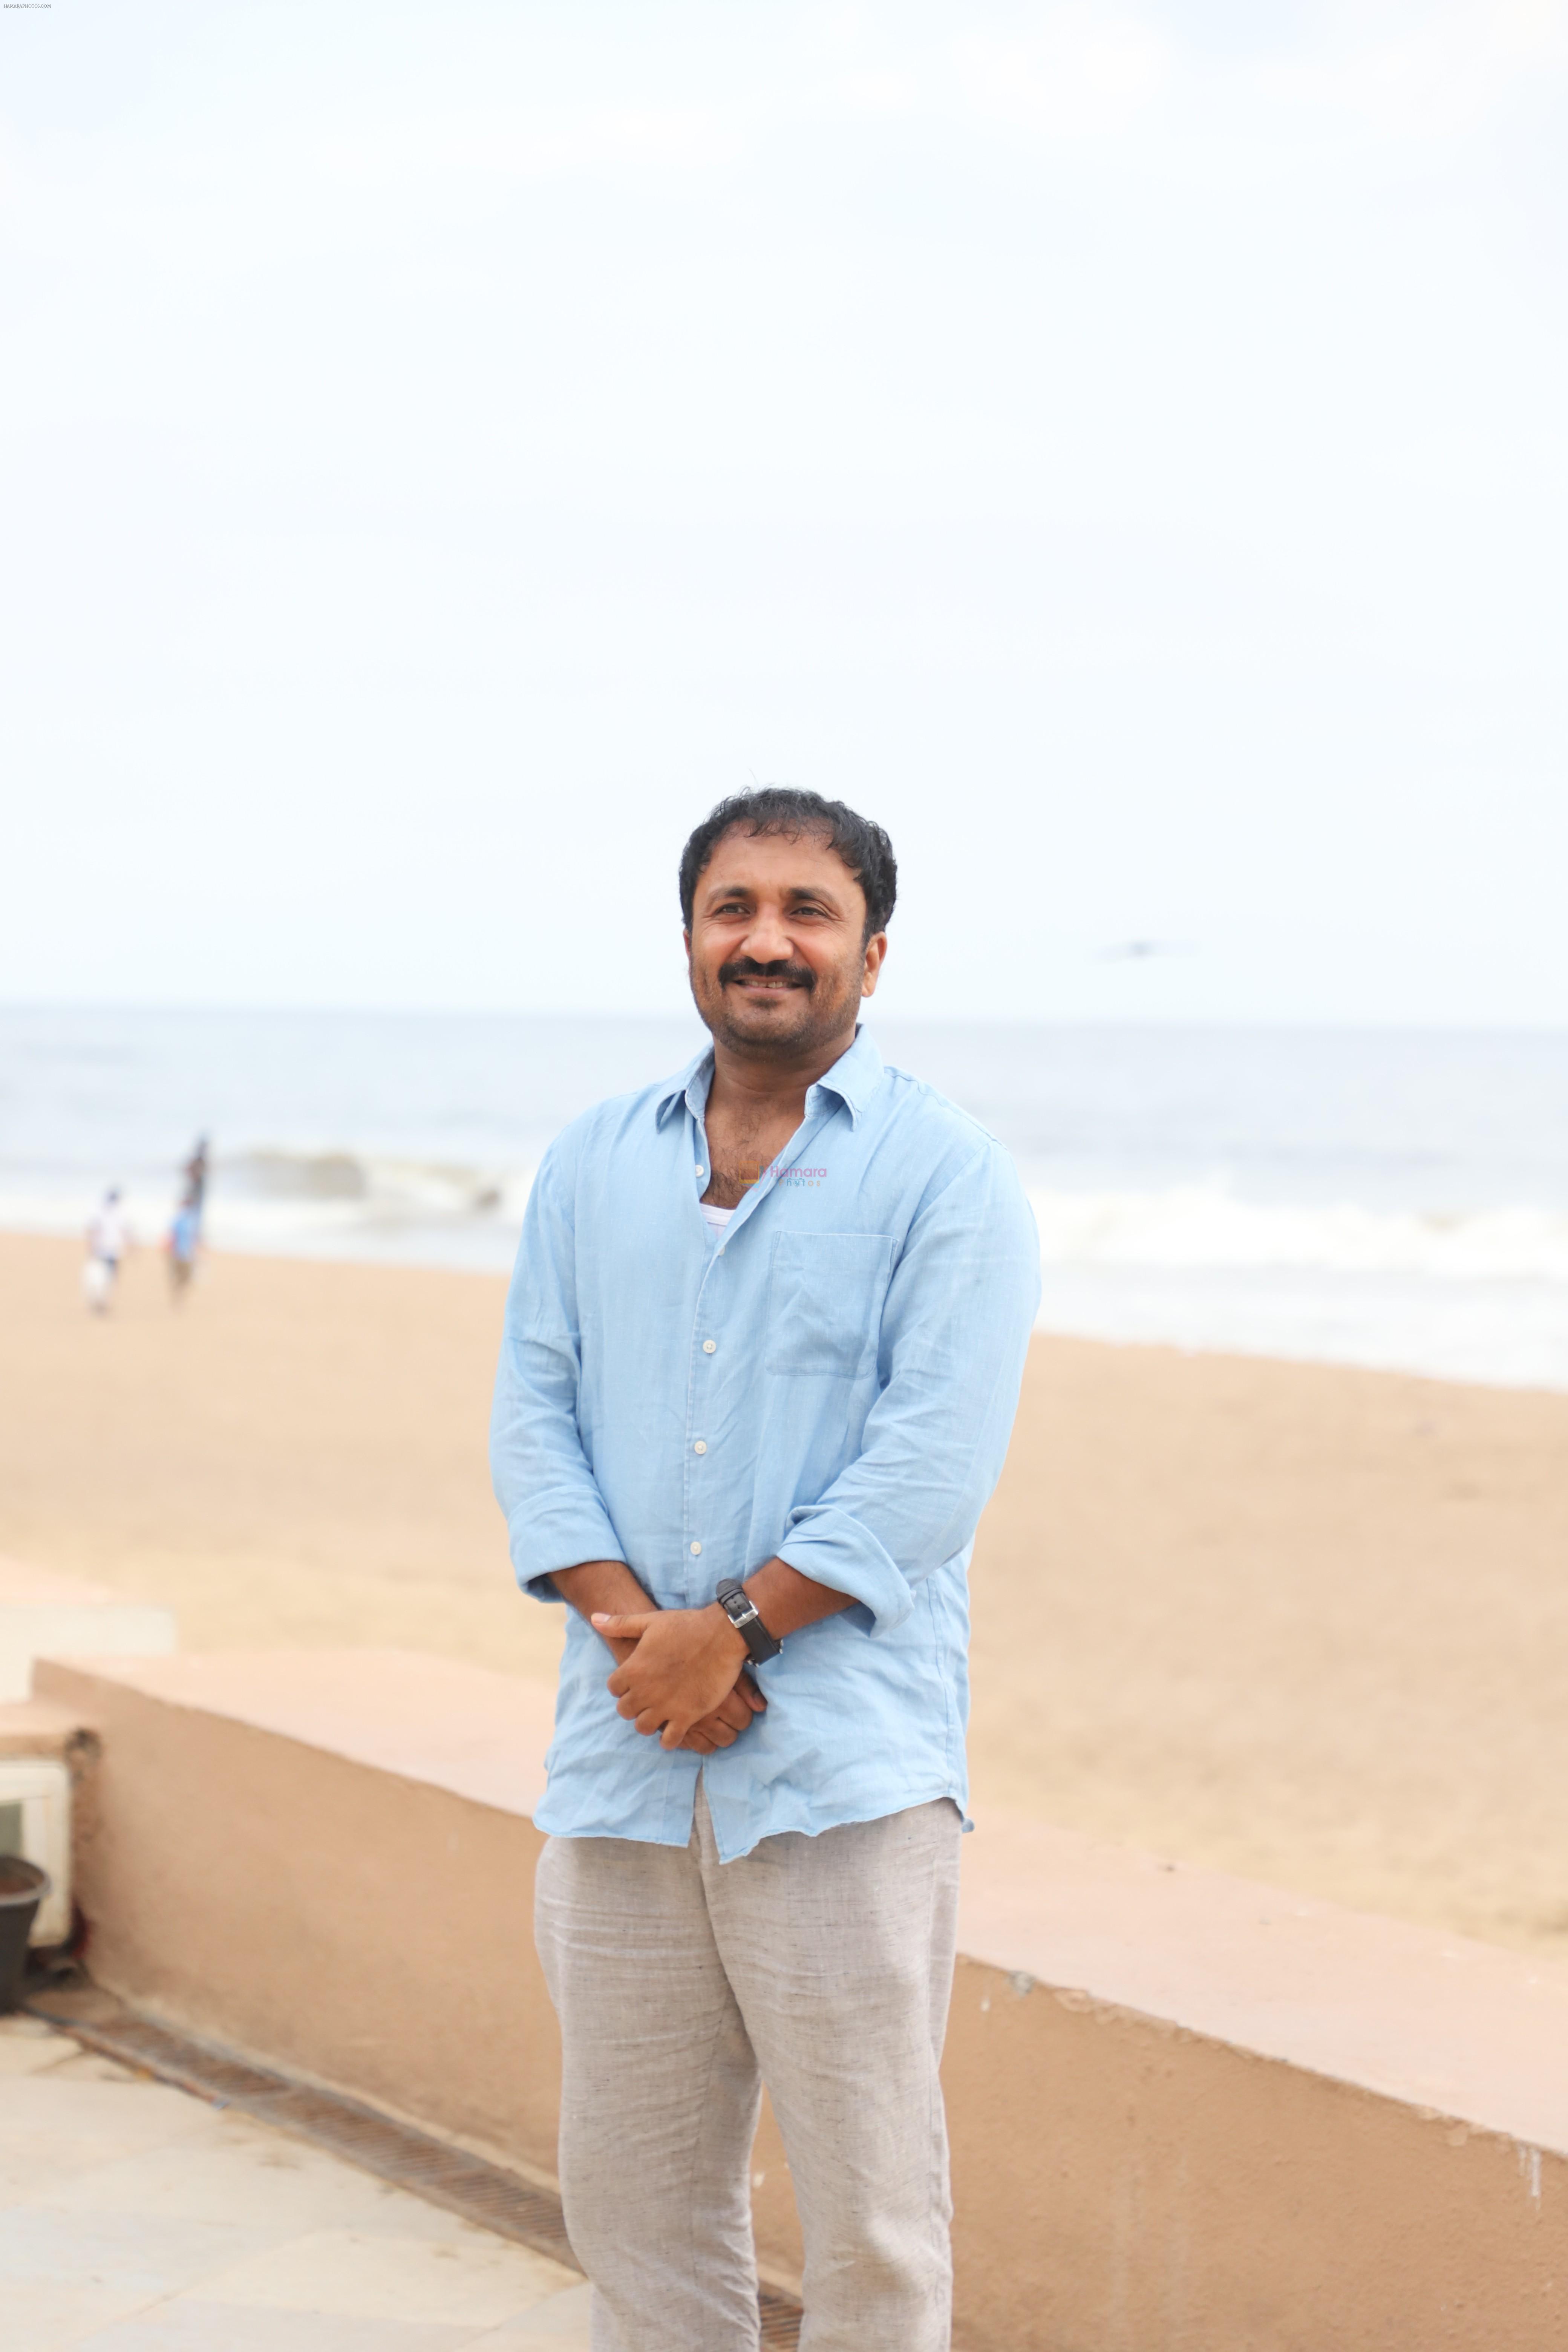 Anand Kumar on whom the Super30 film is based on at Sun n Sand in juhu for the media interactions for the film on 12th June 2019